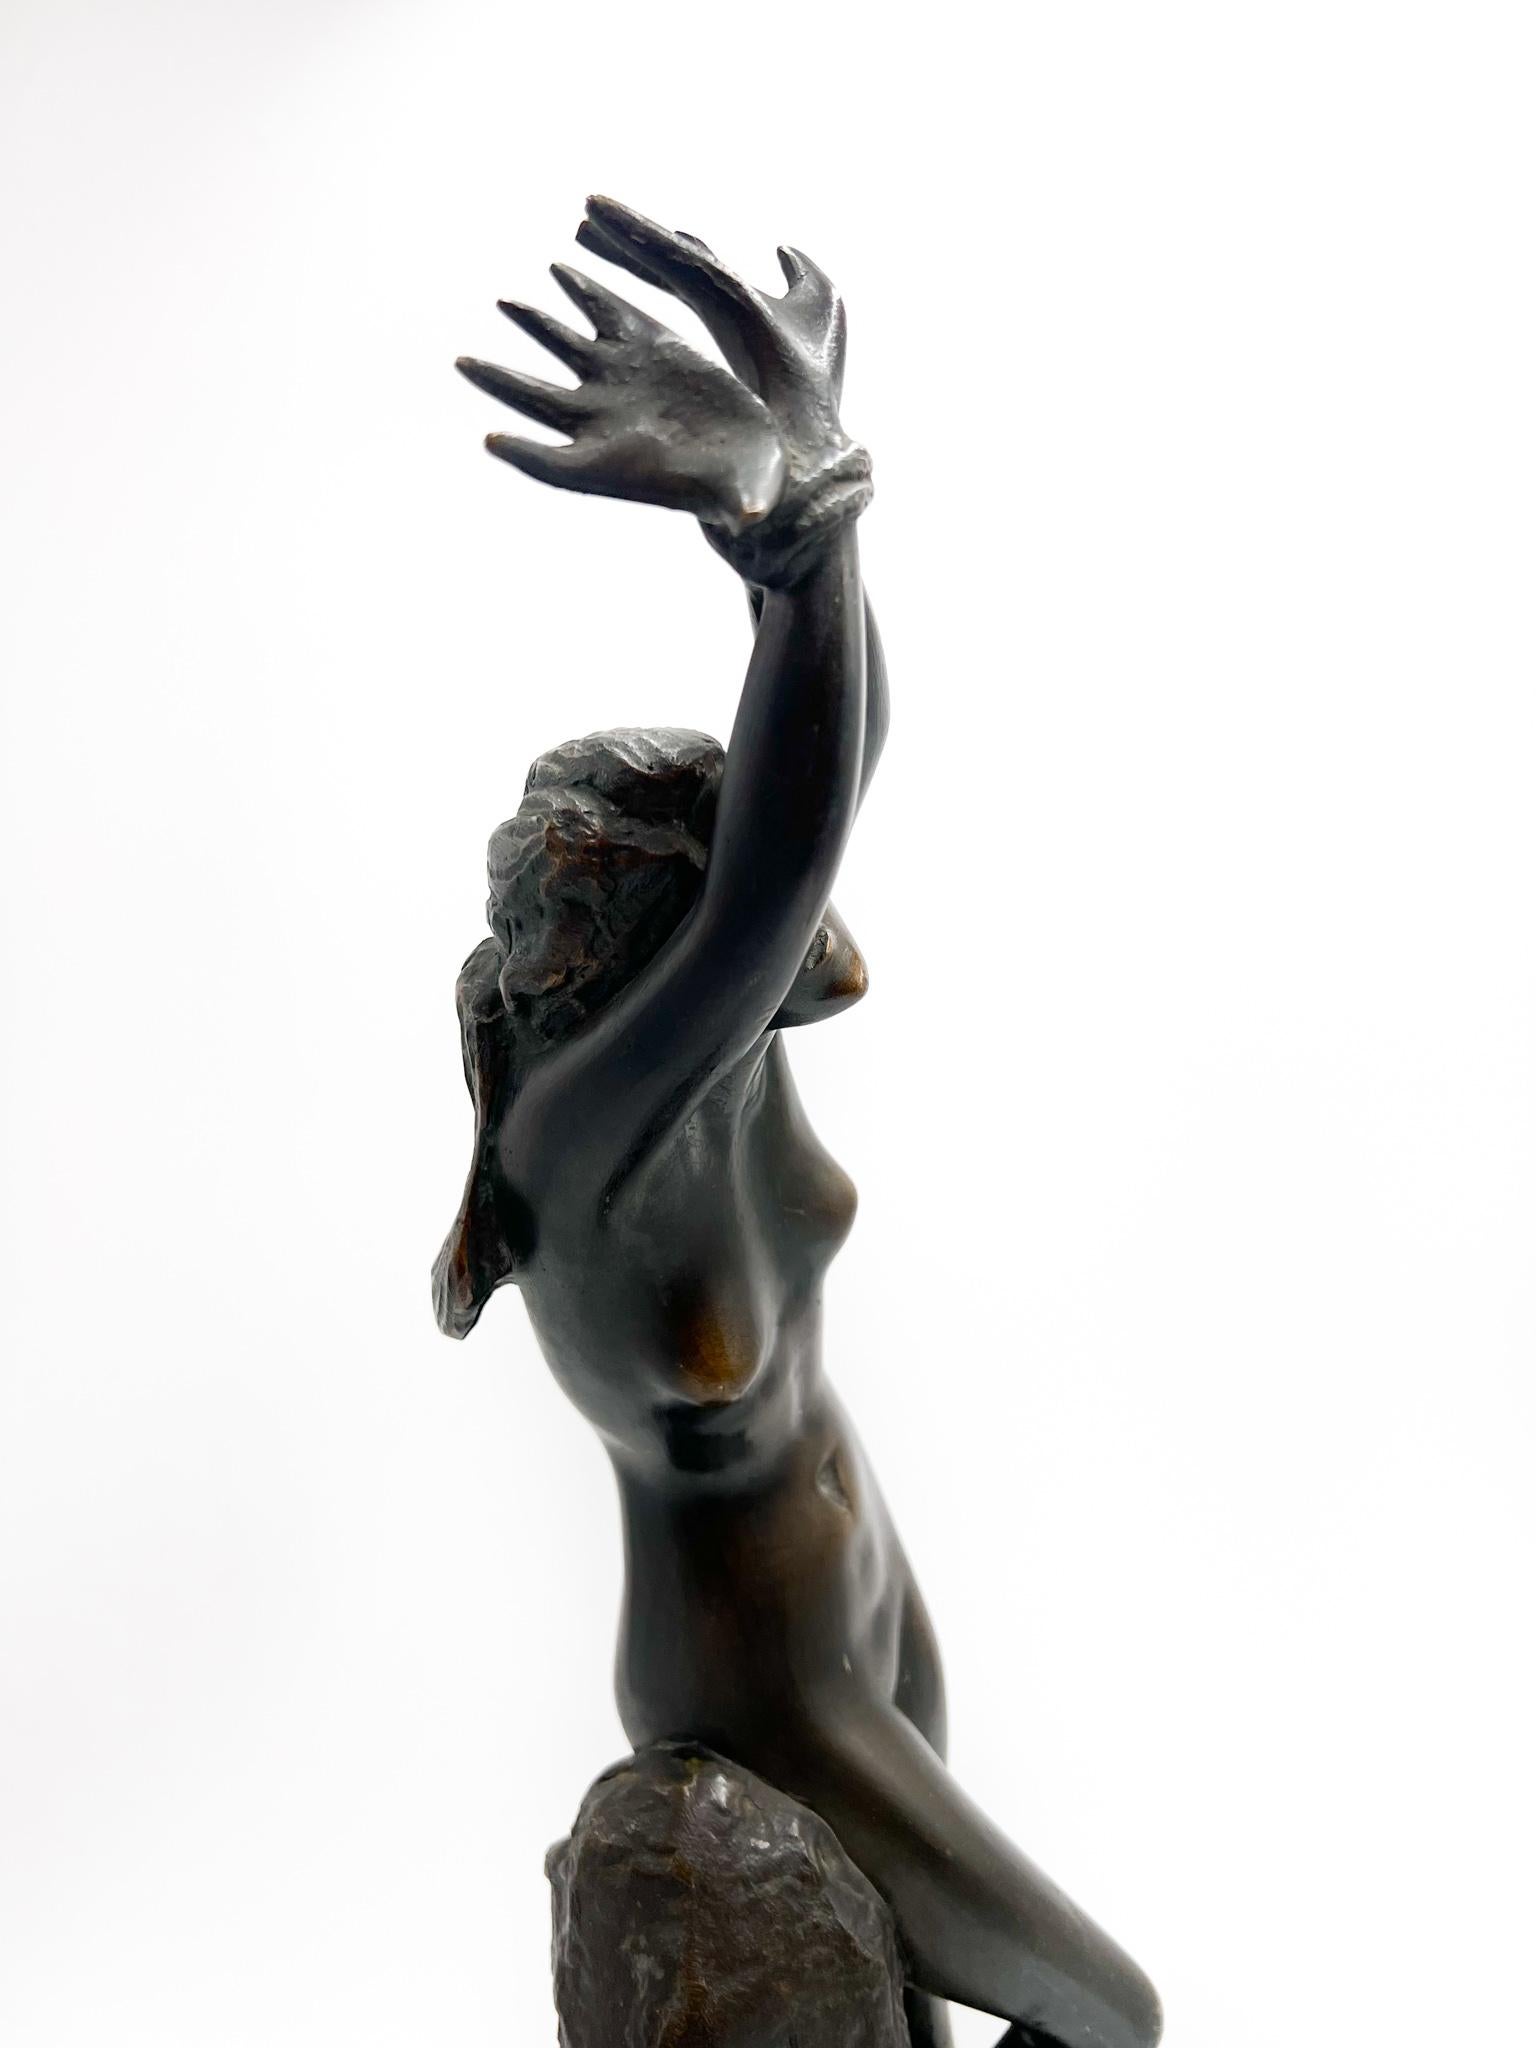 Other Bronze Sculpture of Chained Woman by Odoardo Tabacchi from the 1800s For Sale